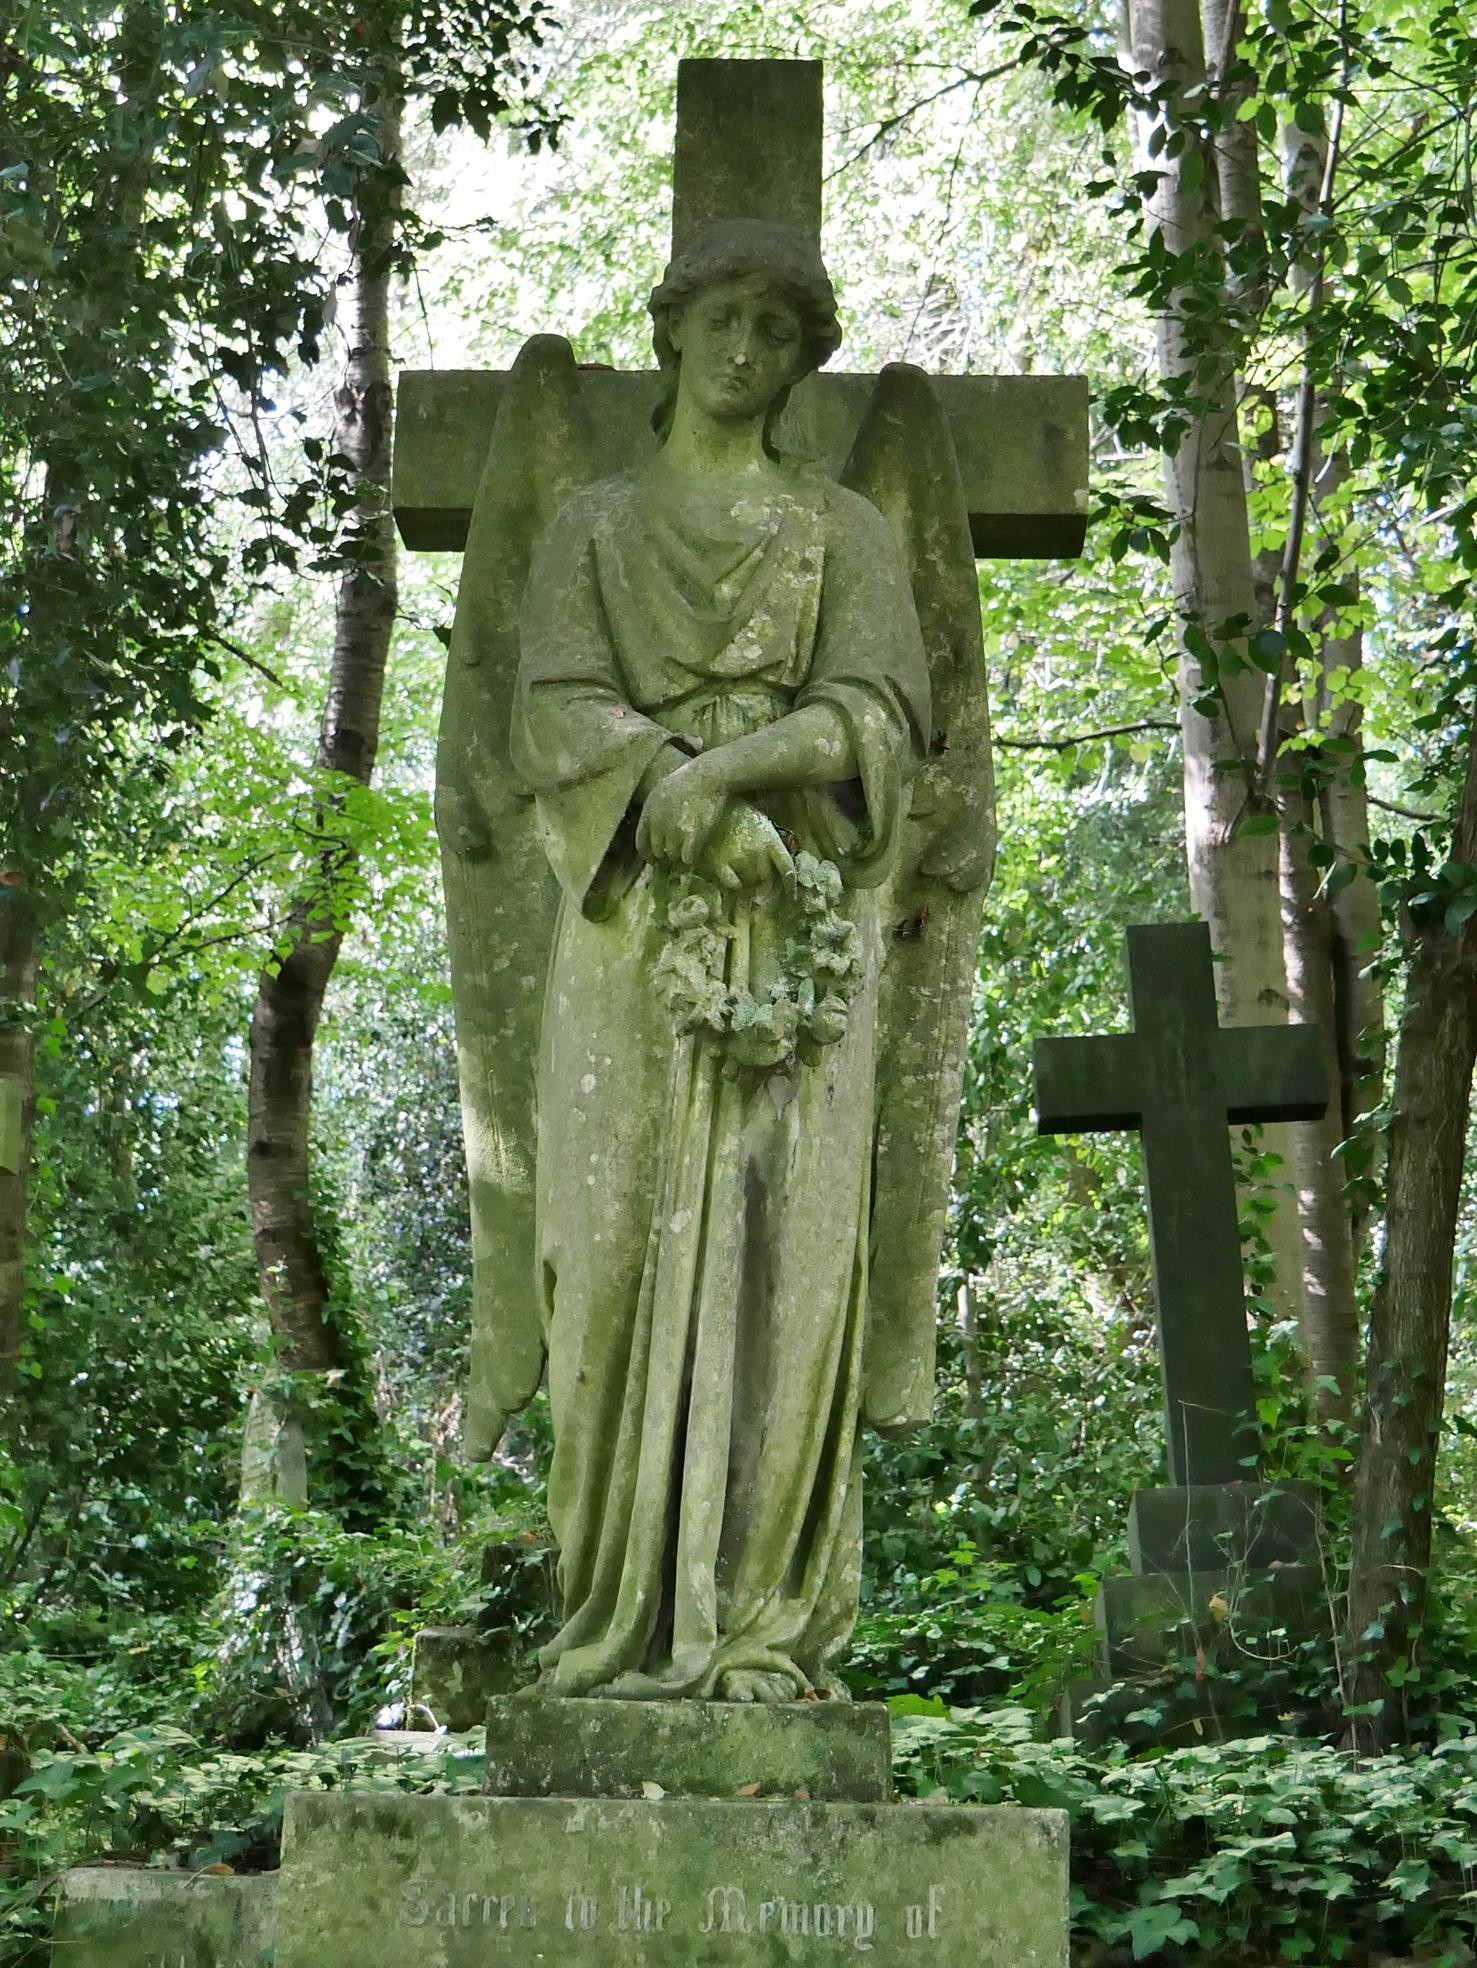 A weeping angel at Highgate Cemetery